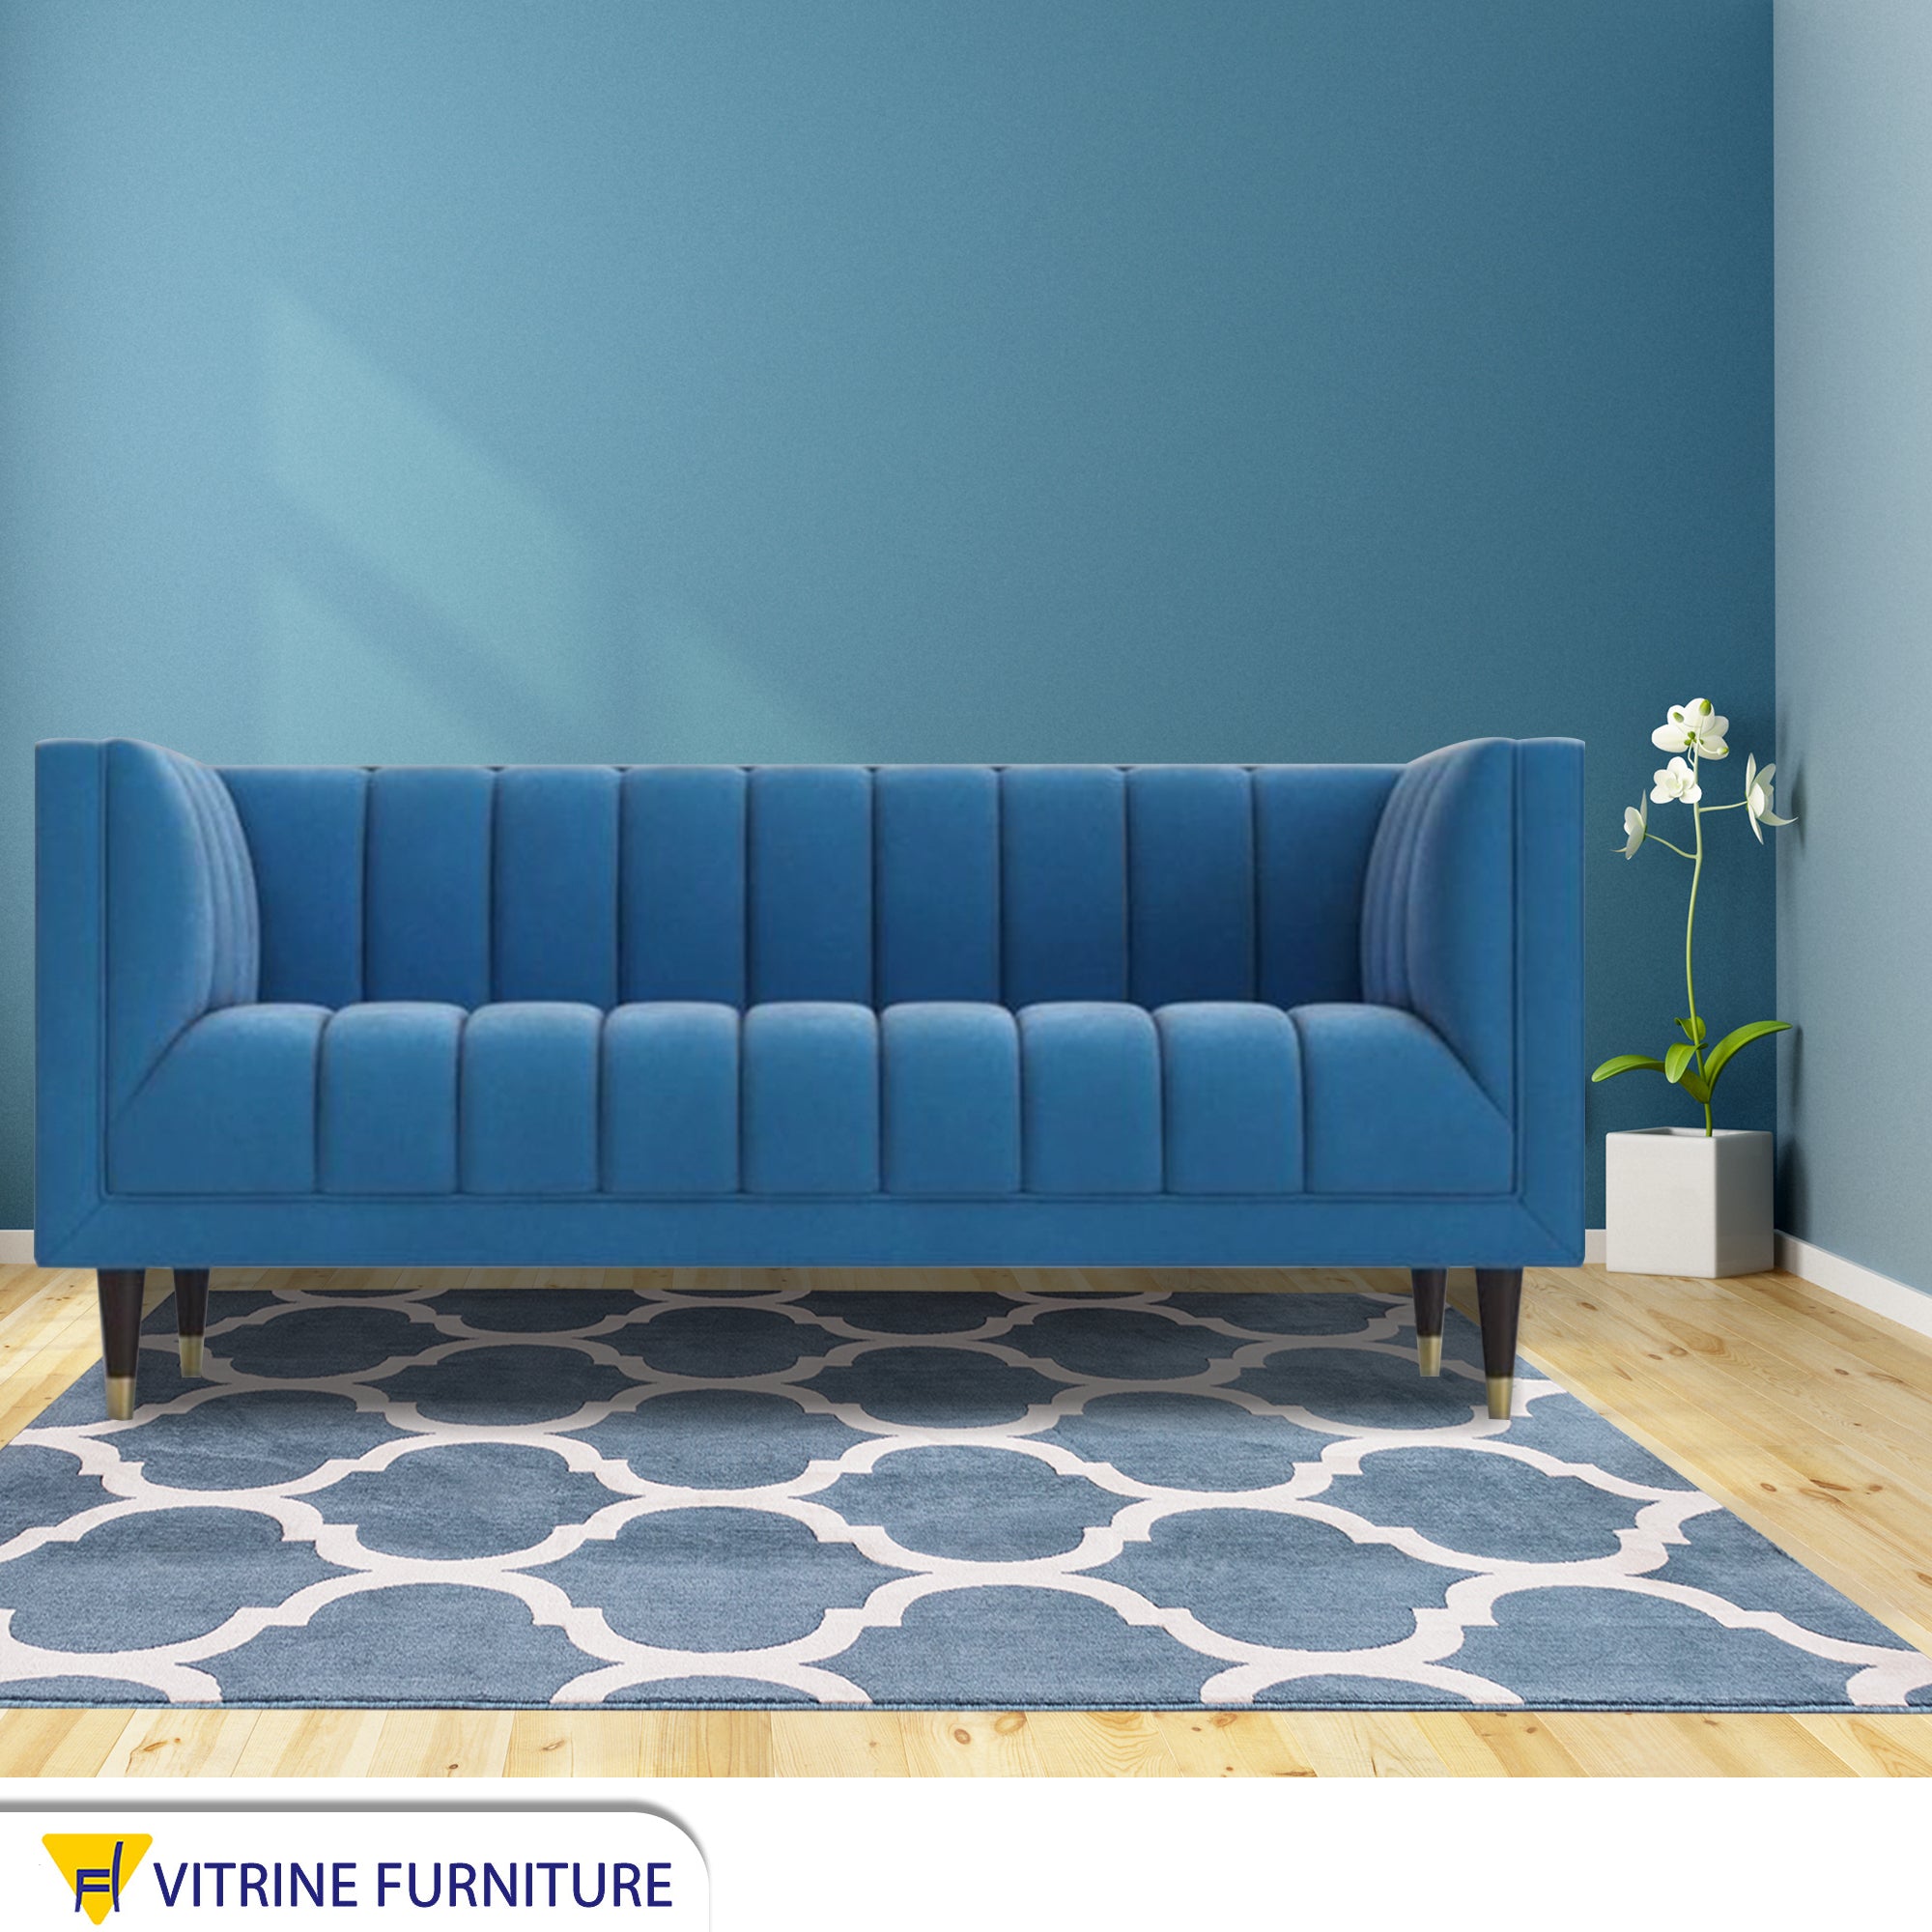 Baby blue sofa with recessed lines on the back and base